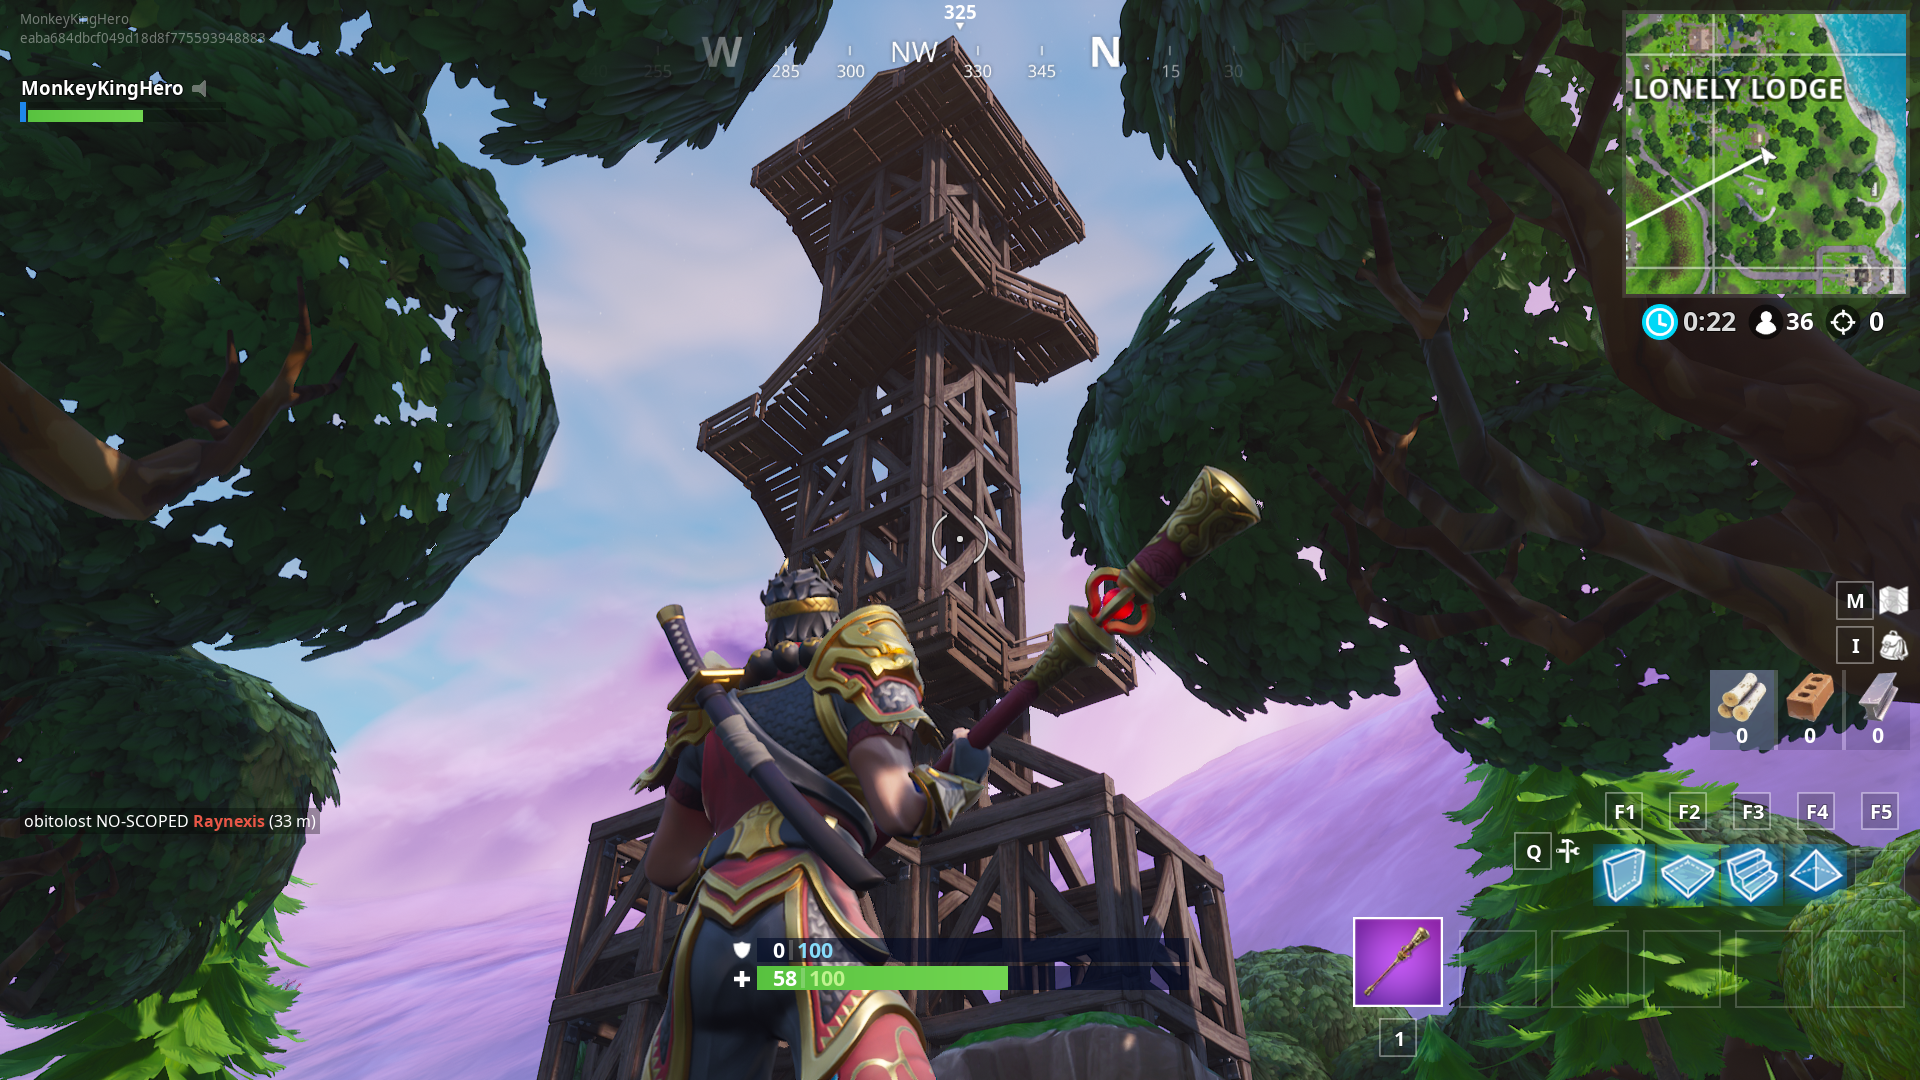 How To Complete The Dance On Top Of A Water Tower Challenge In - how to complete the dance on top of a water tower challenge in fortnite season 7 week 5